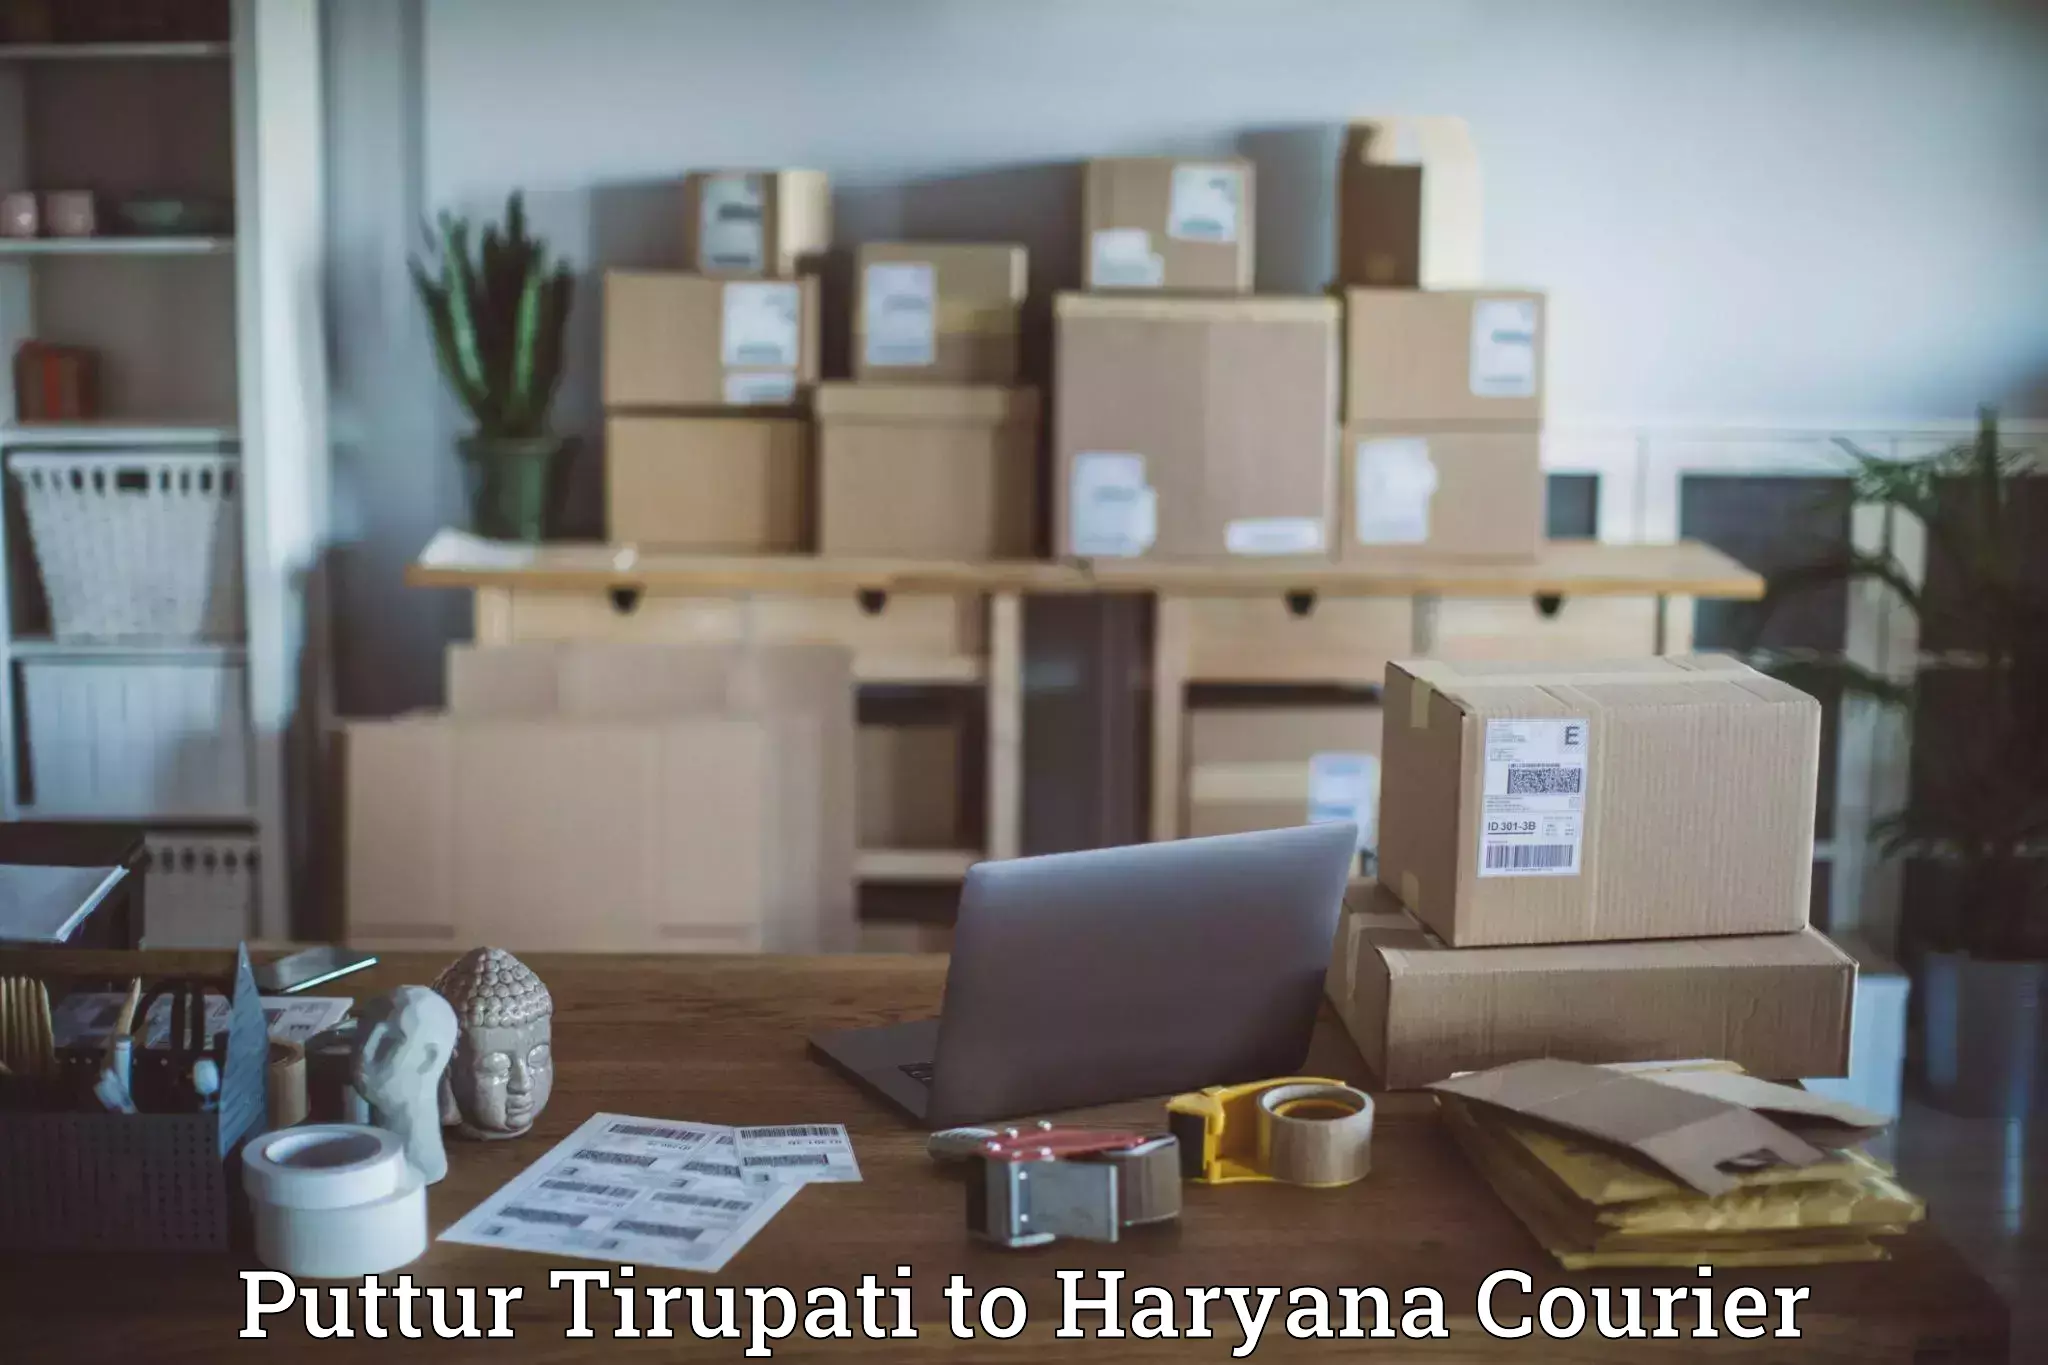 Courier service comparison Puttur Tirupati to Chaudhary Charan Singh Haryana Agricultural University Hisar